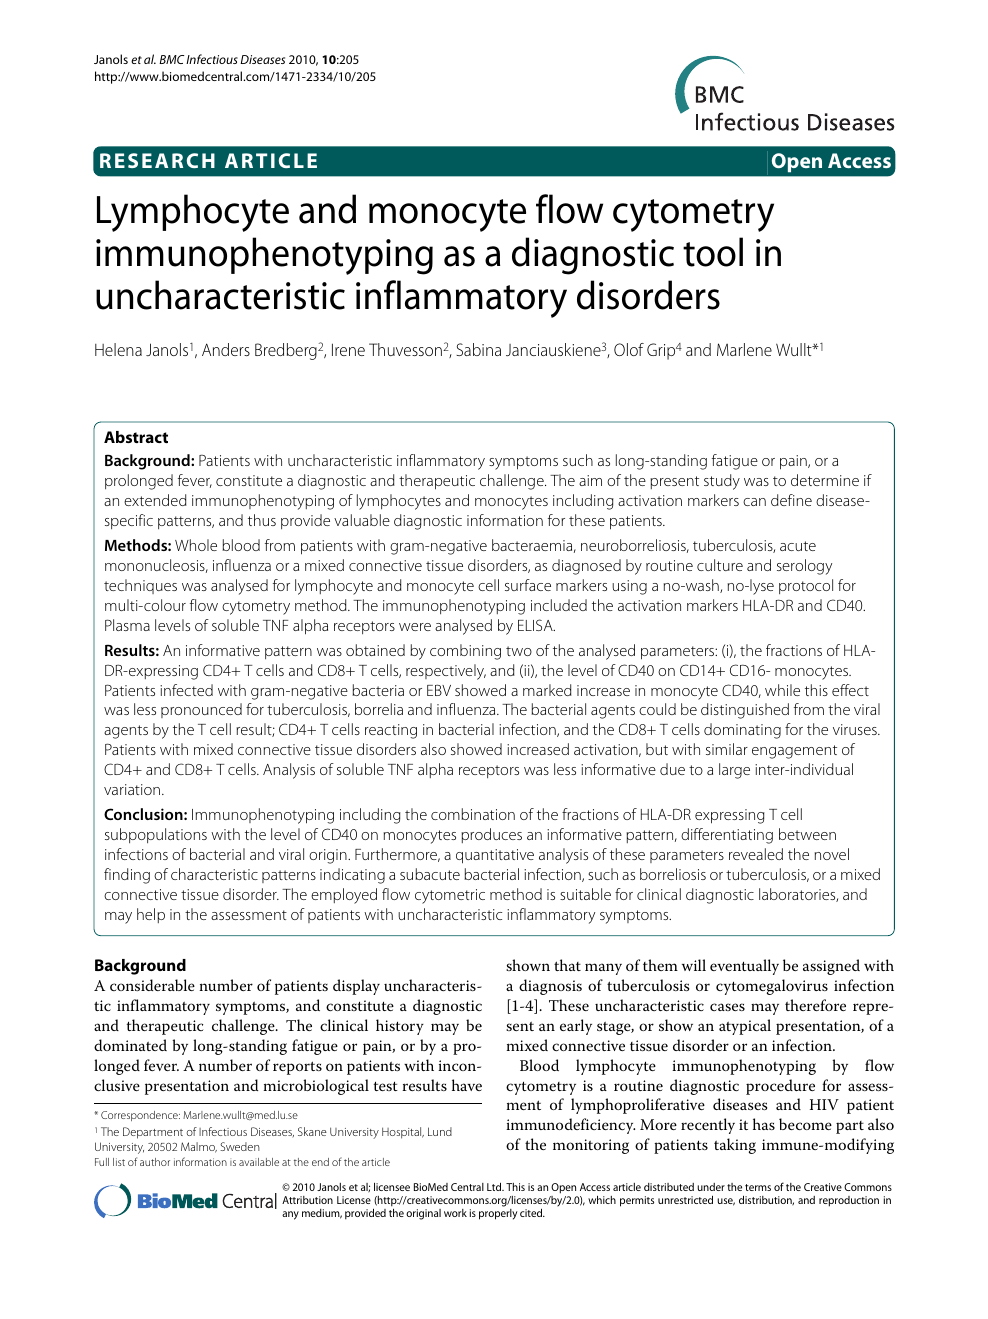 Lymphocyte And Monocyte Flow Cytometry Immunophenotyping As A Diagnostic Tool In Uncharacteristic Inflammatory Disorders Topic Of Research Paper In Clinical Medicine Download Scholarly Article Pdf And Read For Free On Cyberleninka